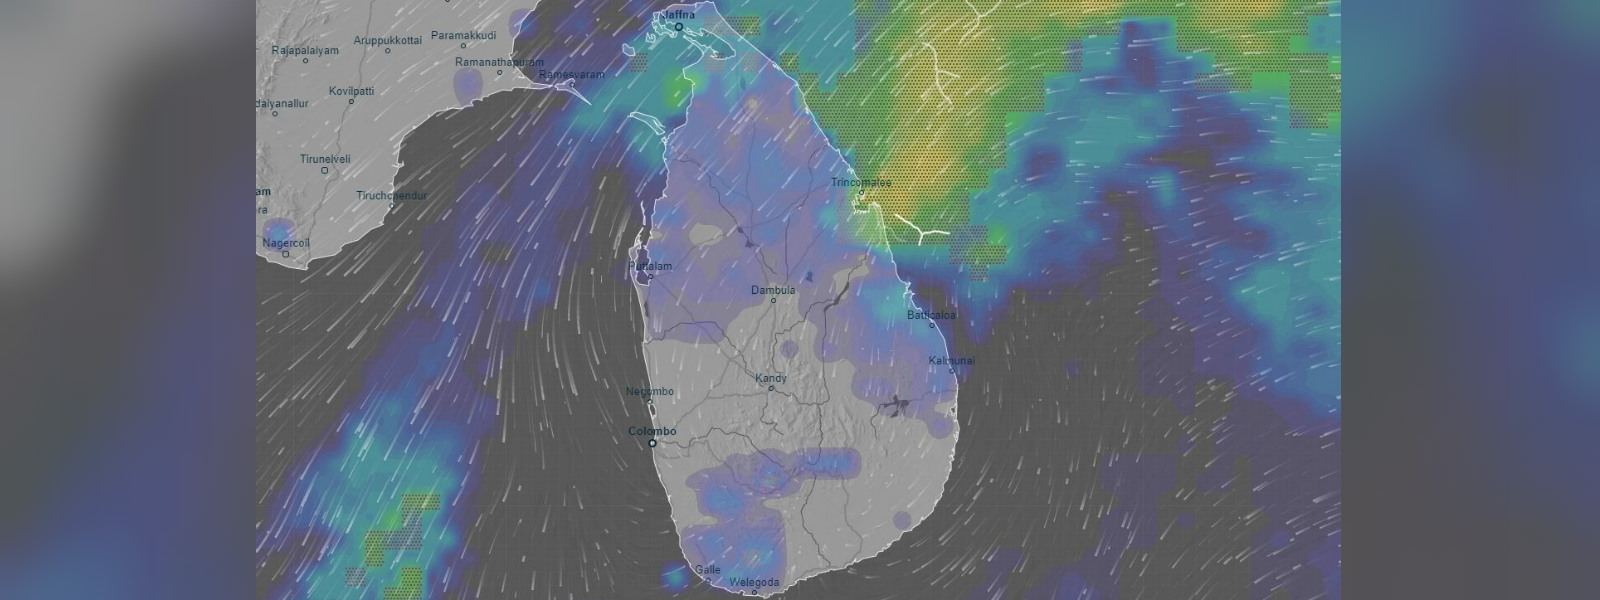 Spells of showers predicted in 2 provinces and Jaffna